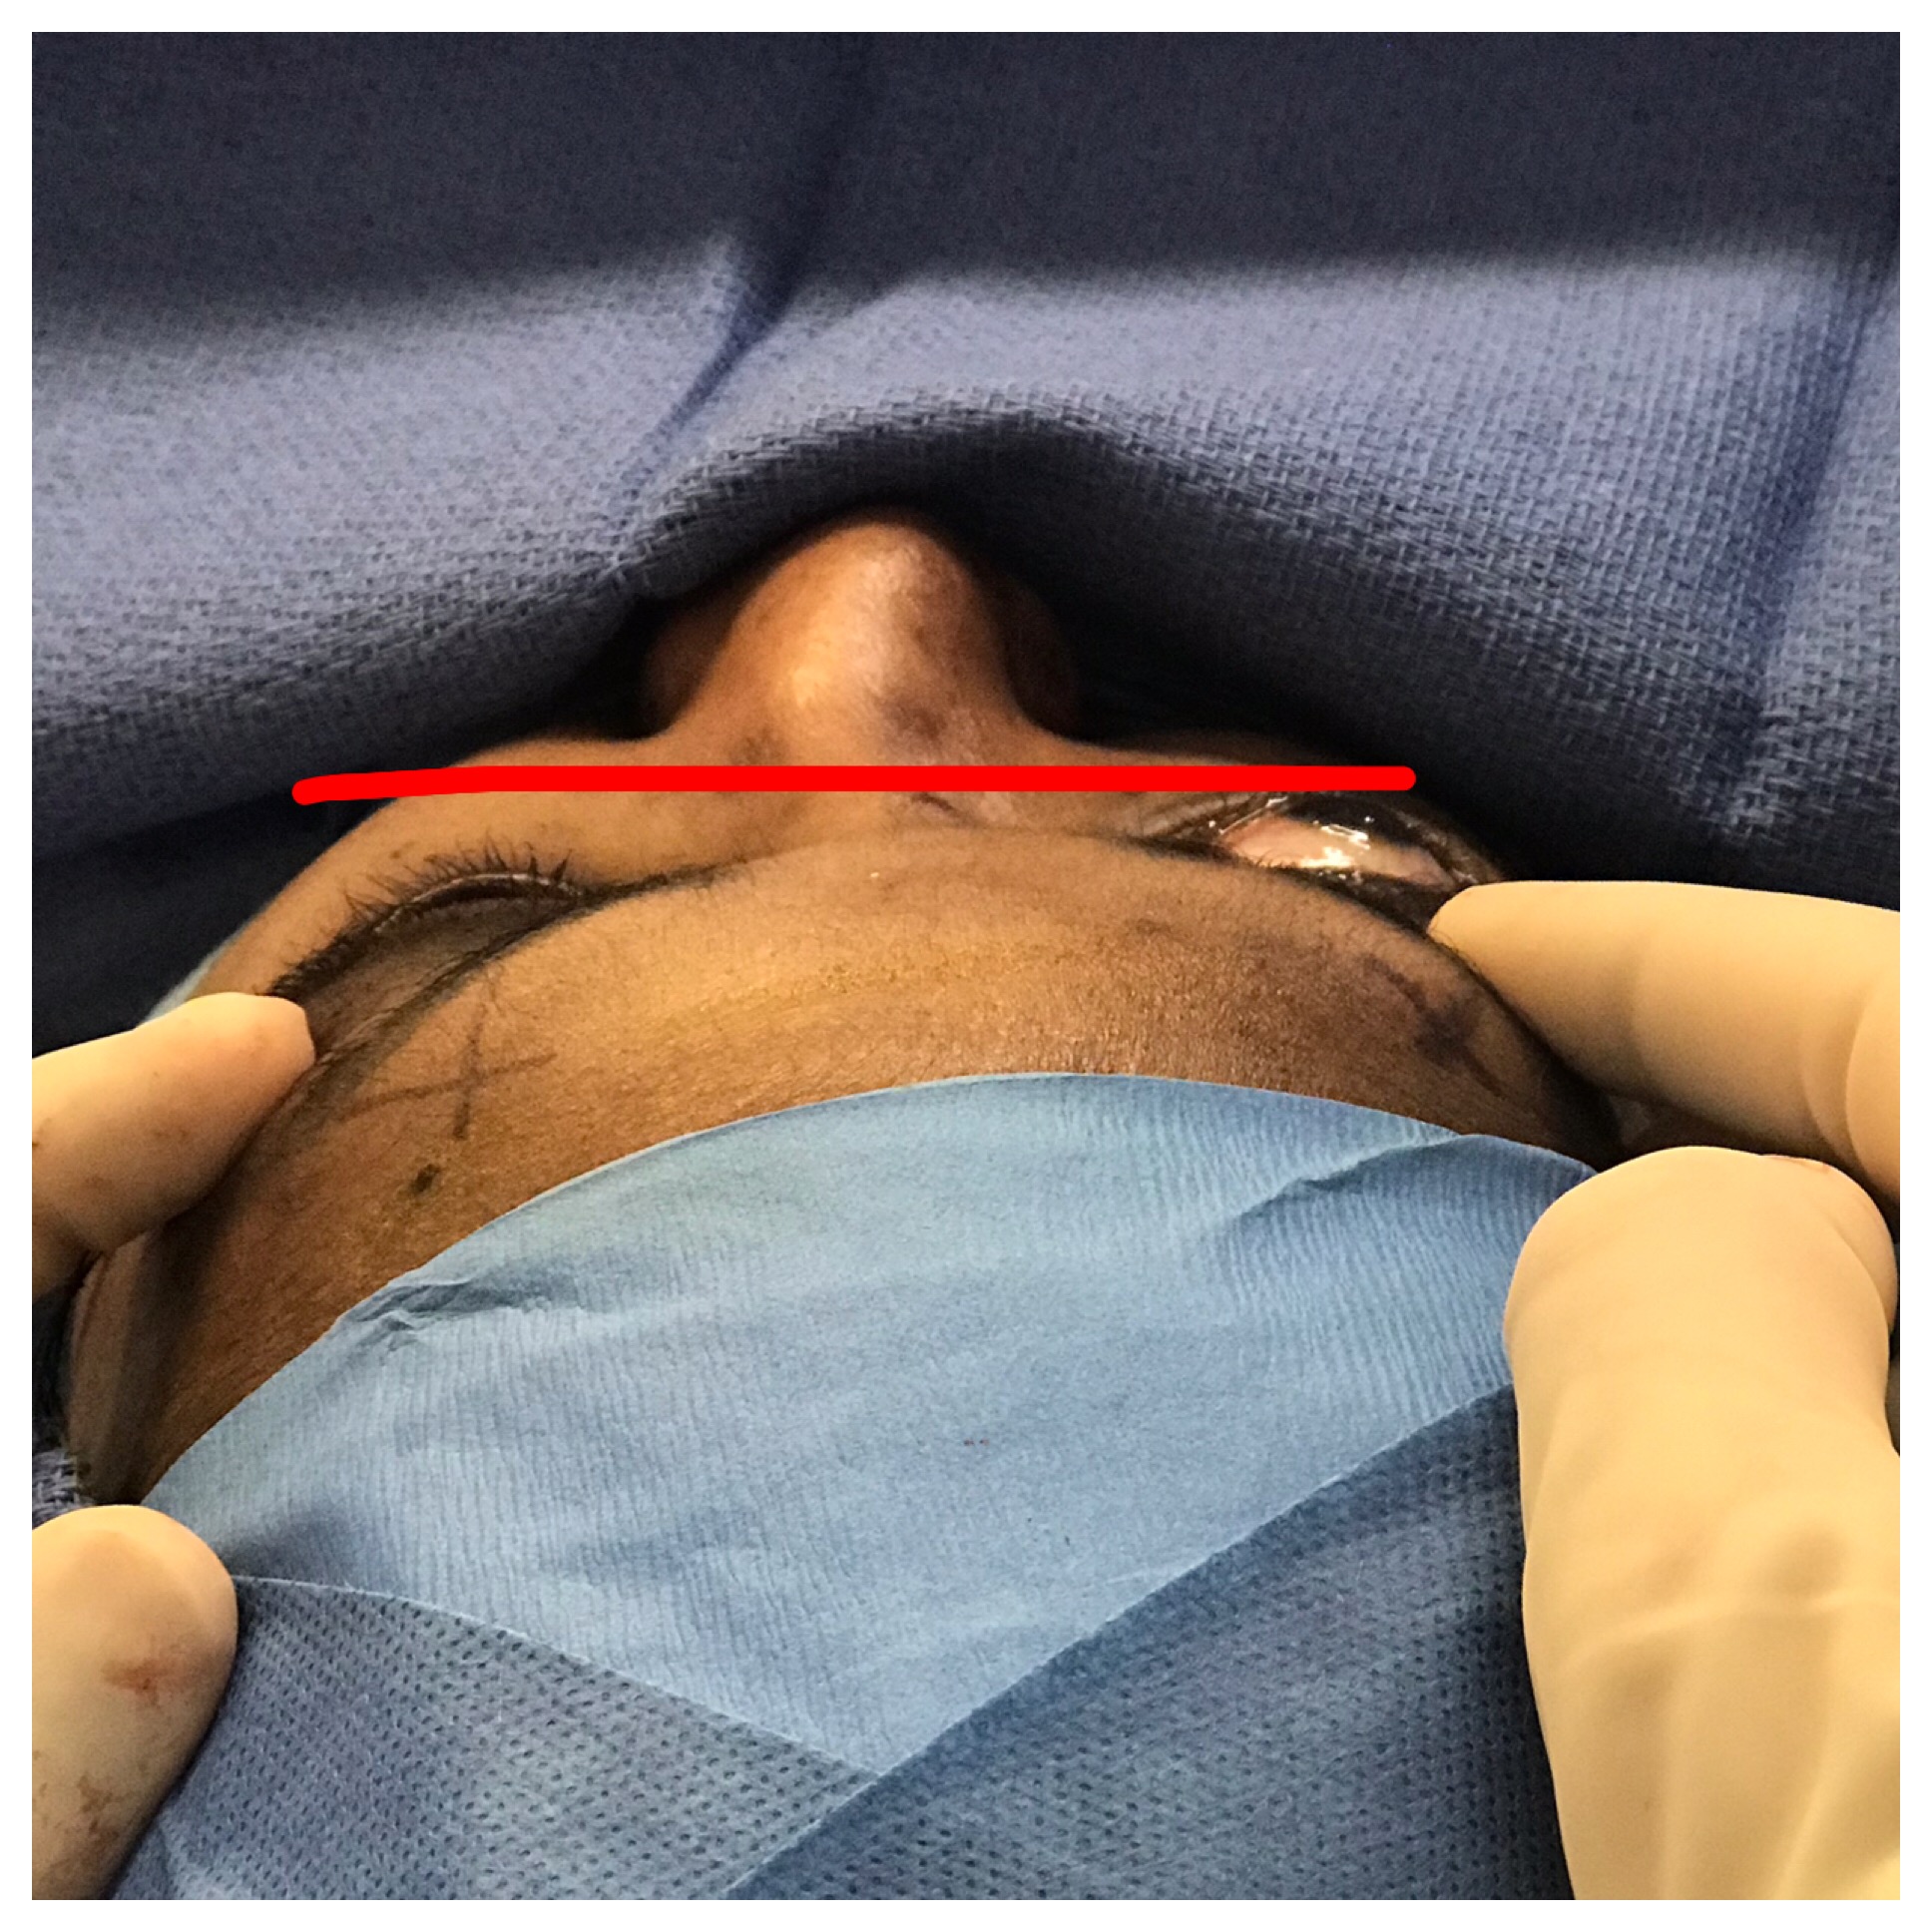 Intraoperative photo showing immediately after scarless left orbital decompression surgery, contrasted with yet untreated bulging right eye.